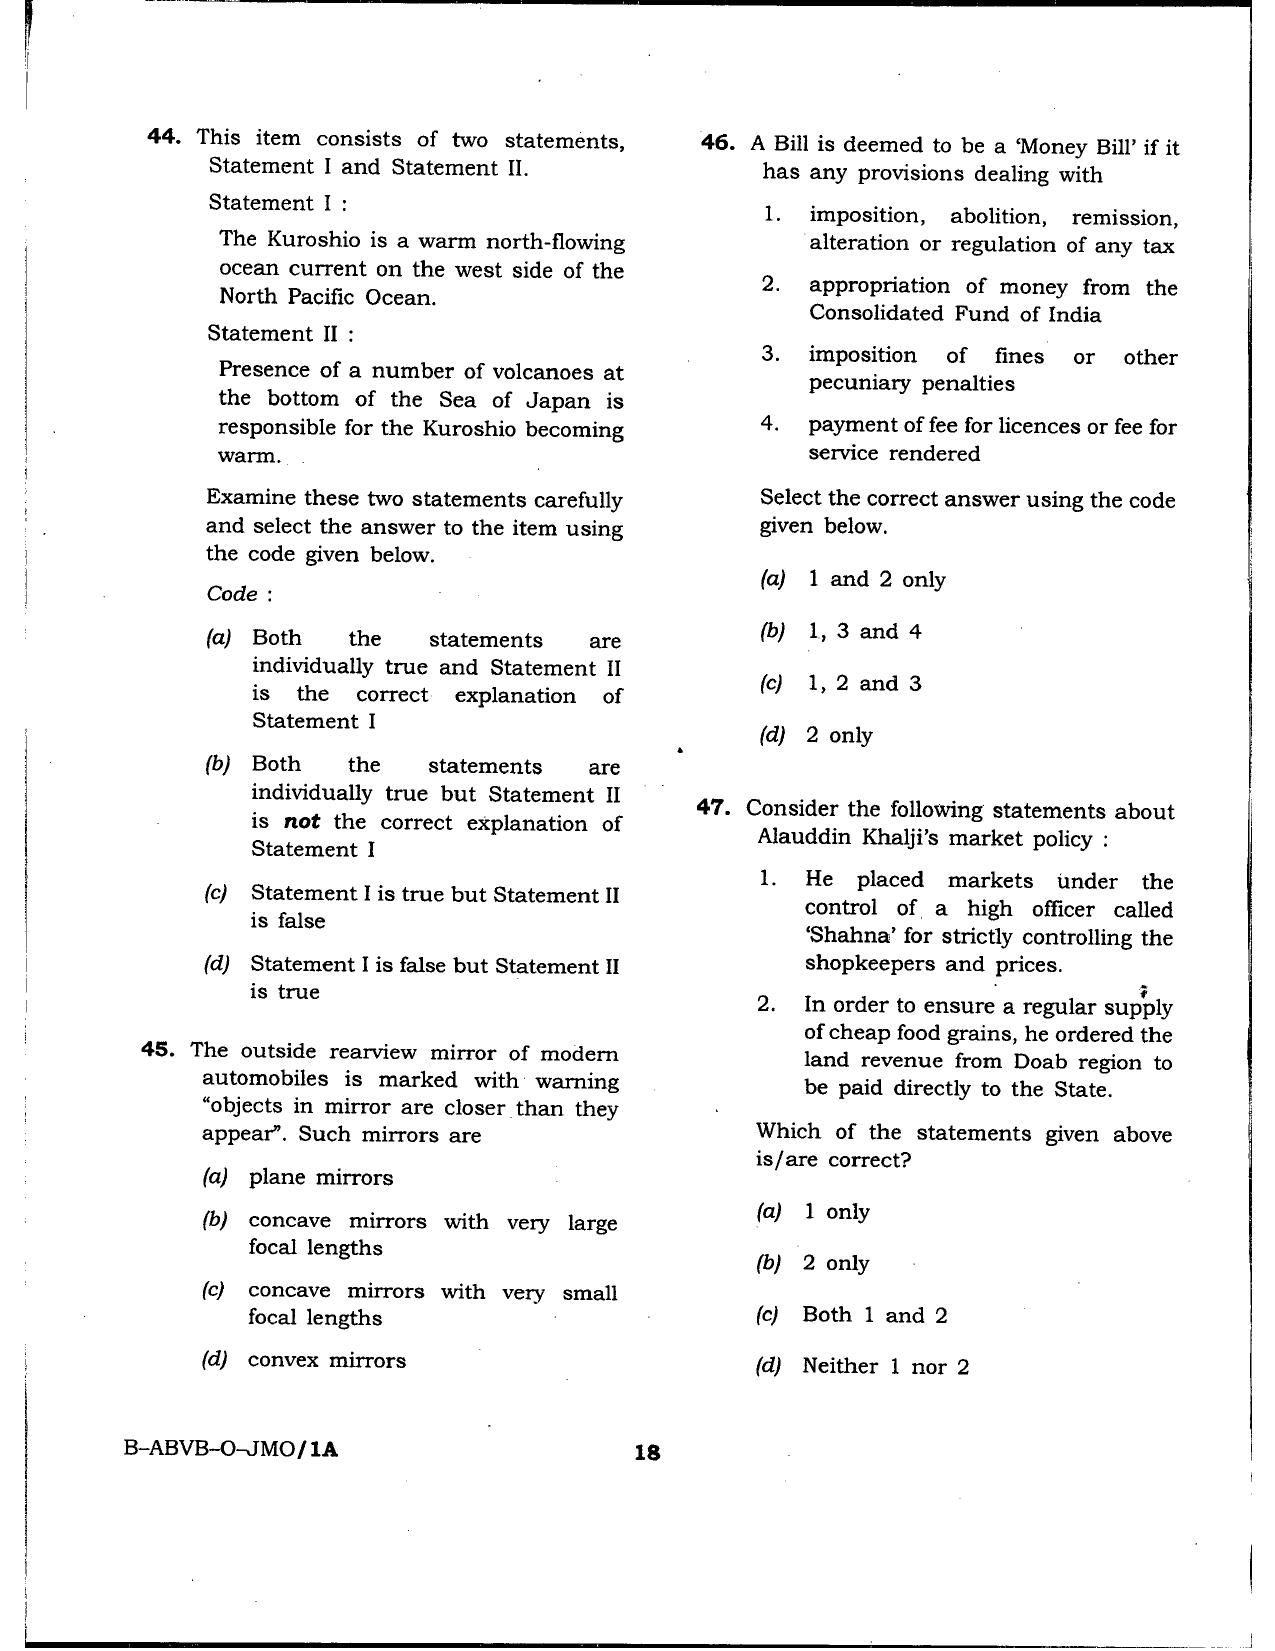 HPSSSB Fitter Model Papers: General Knowledge - Page 18